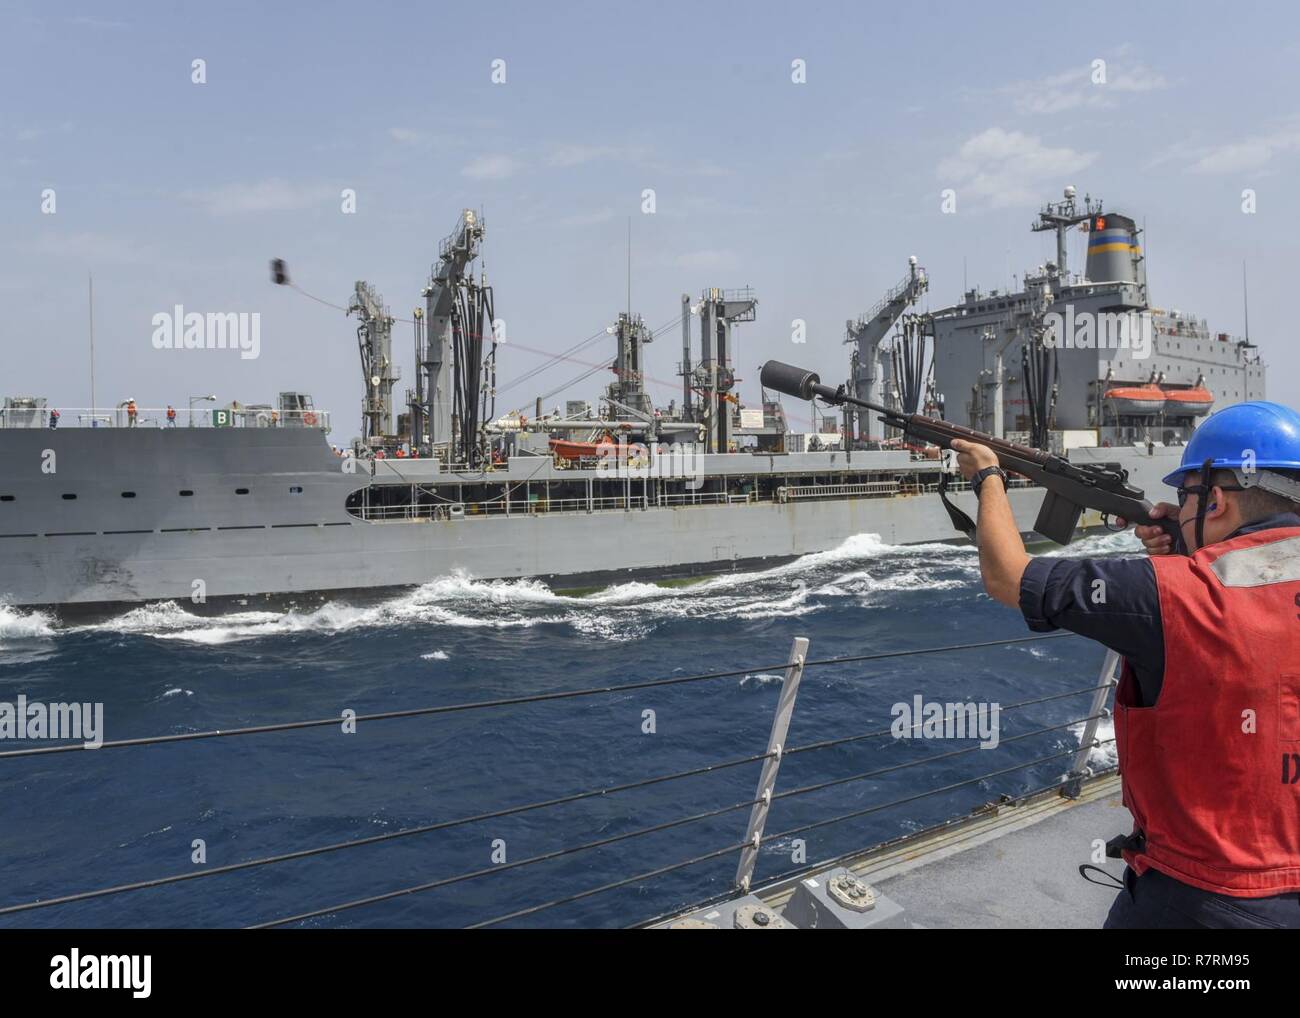 ARABIAN SEA (April 3, 2017) Fire Controlman 2nd Class Christopher Stangl fires a shot line from the guided-missile destroyer USS Mahan (DDG 72) to the Military Sealift Command fleet replenishment oiler USNS Walter S. Diehl (T-AO 193) during a replenishment-at-sea. Mahan is part of the George H.W. Bush Carrier Strike Group deployed in the U.S. 5th Fleet area of operations in support of maritime security operations designed to reassure allies and partners, preserve the freedom of navigation and the free flow of commerce in the region. Stock Photo